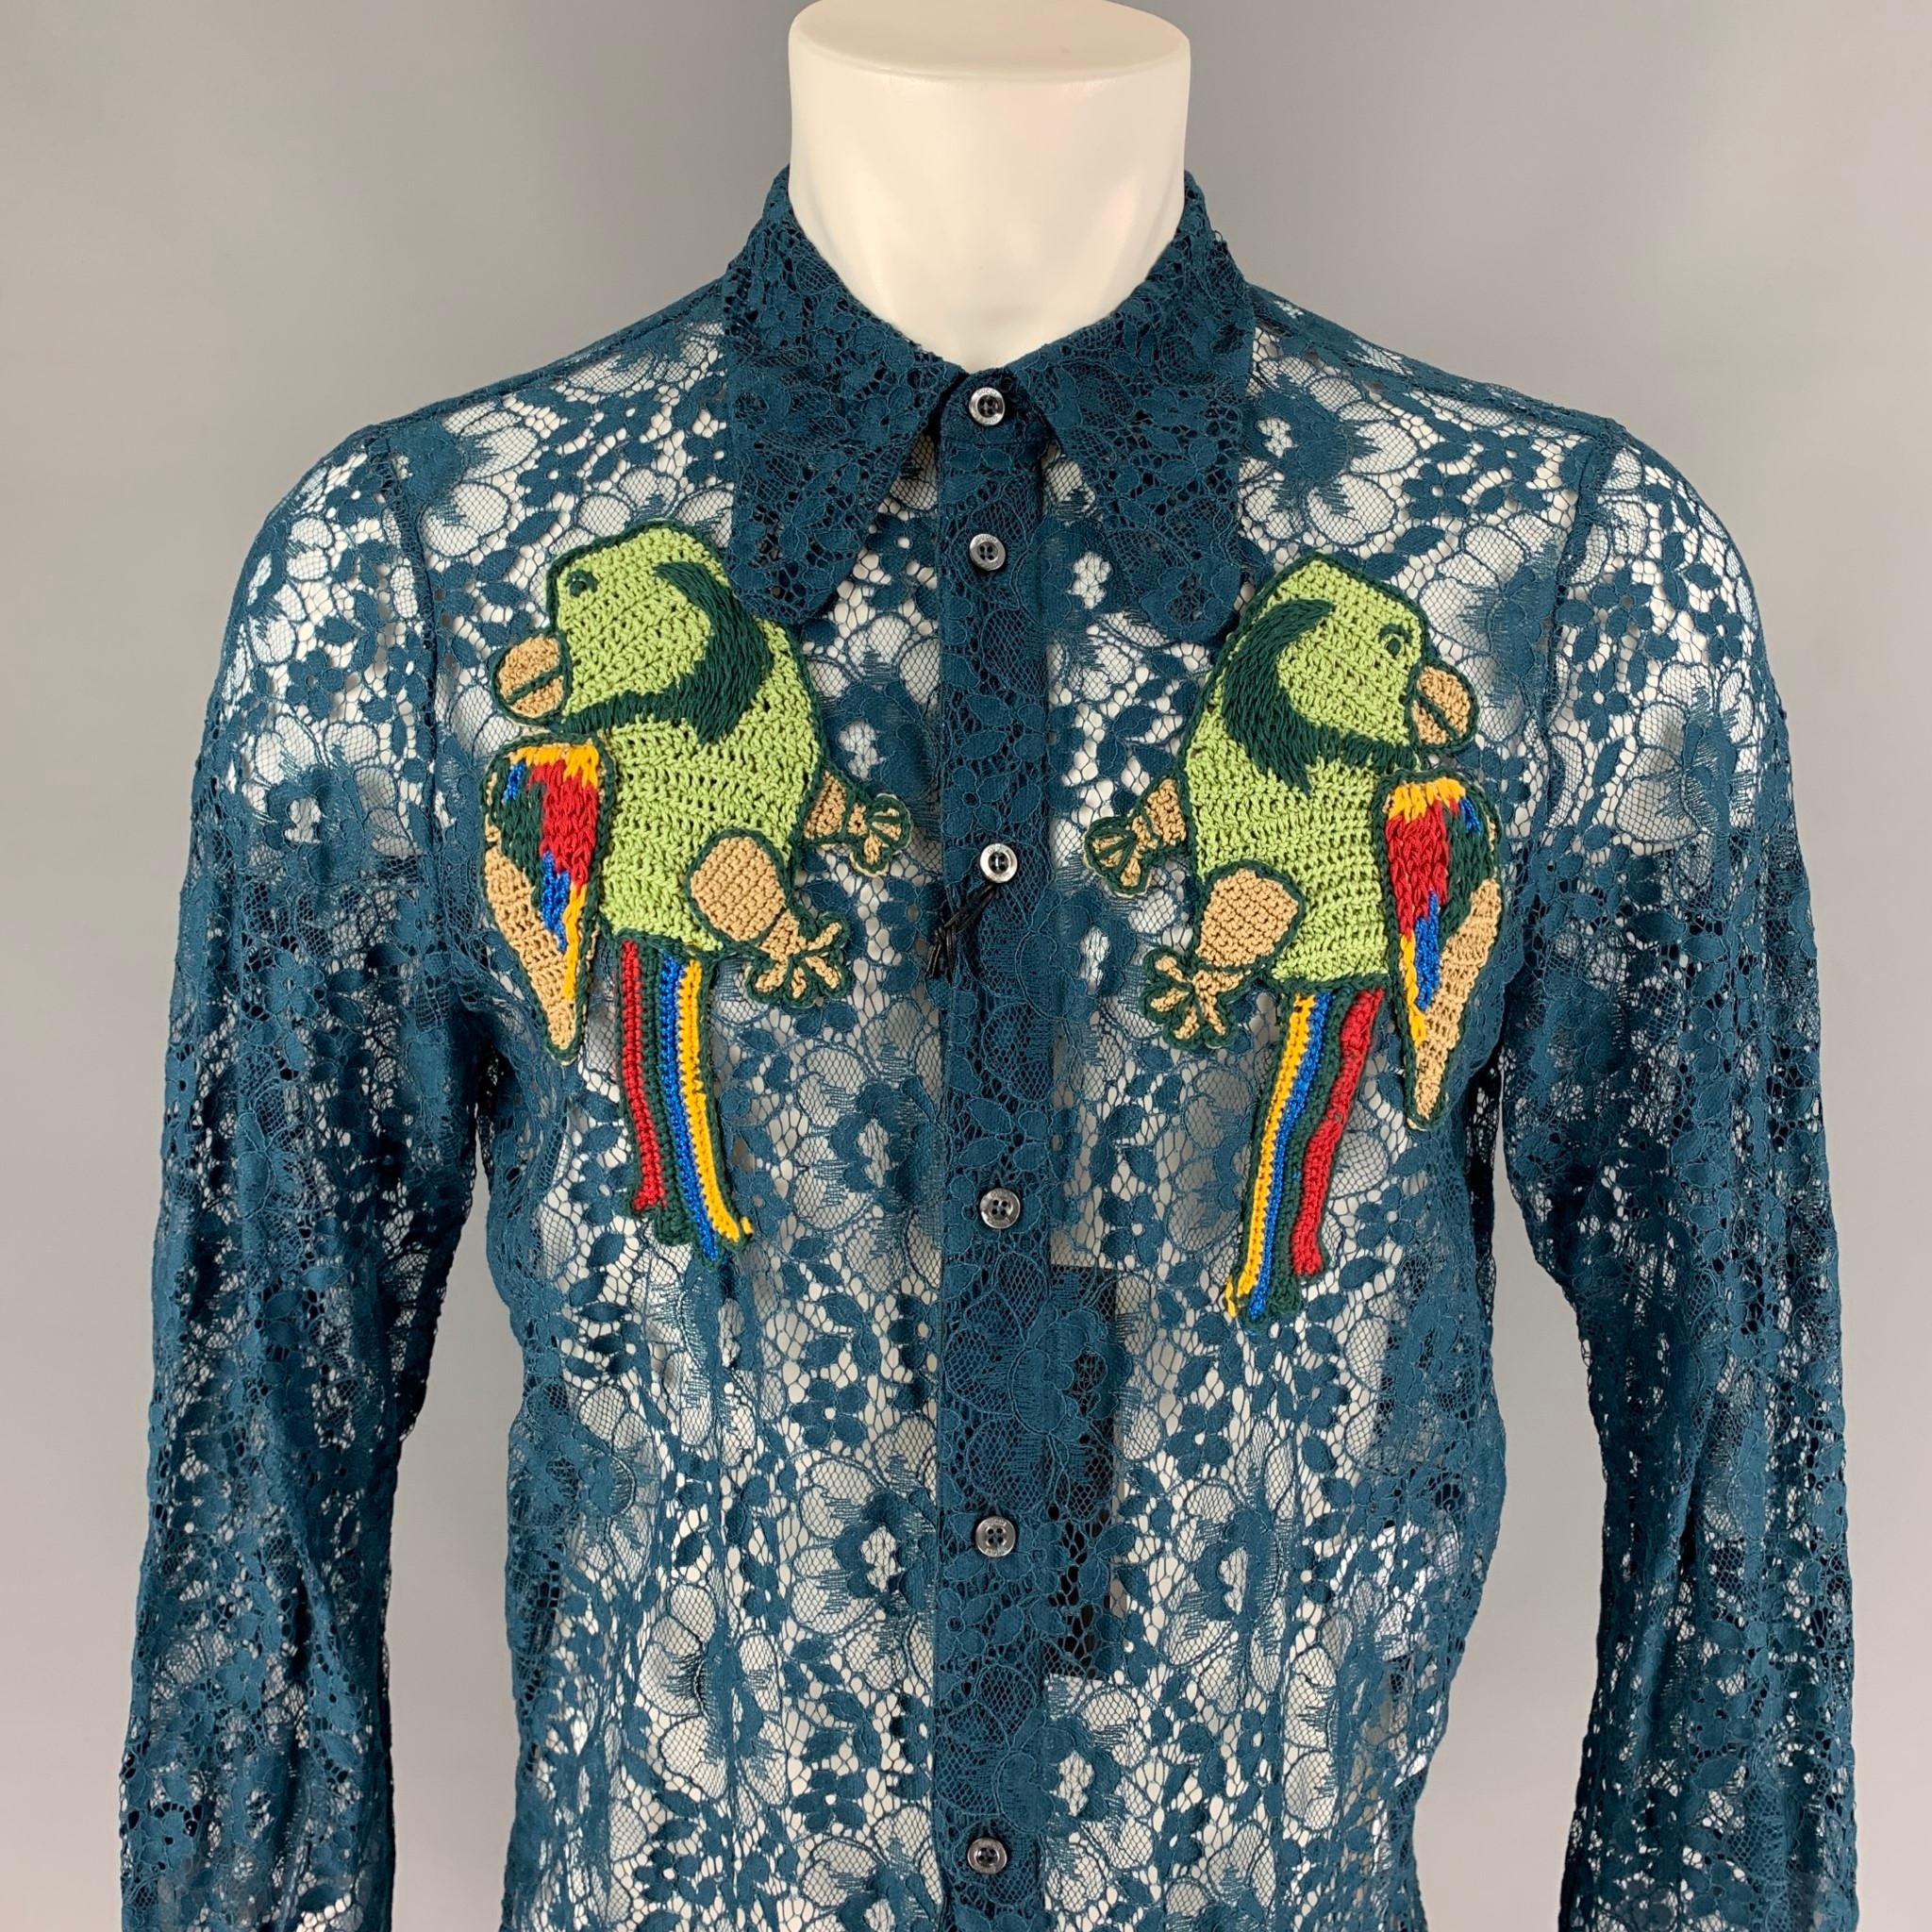 GUCCI S/S 16 long sleeve shirt comes in a teal sheer lace polyamide blend with front embroidery details featuring a pointed collar and a buttoned closure. Made in Italy.

New With Tags.
Marked: 52

Measurements:

Shoulder: 16.5 in.
Chest: 42